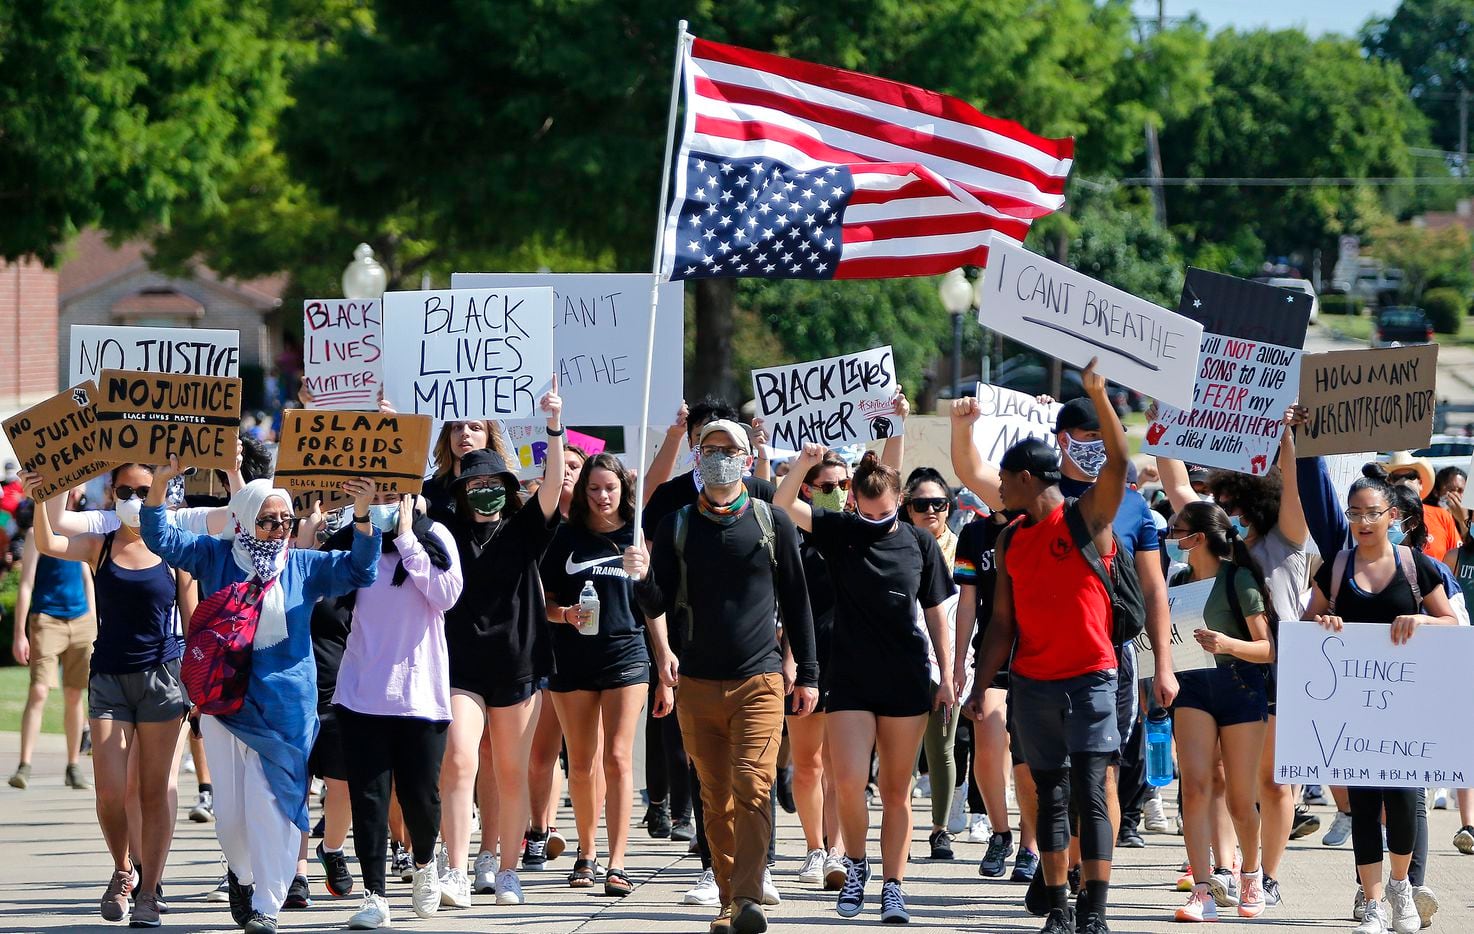 Protesters march beside the Plano Police Department at a protest organized by Our Revolution Texas which started at Haggard Park in Plano on Wednesday, June 3, 2020. (Stewart F. House/Special Contributor)